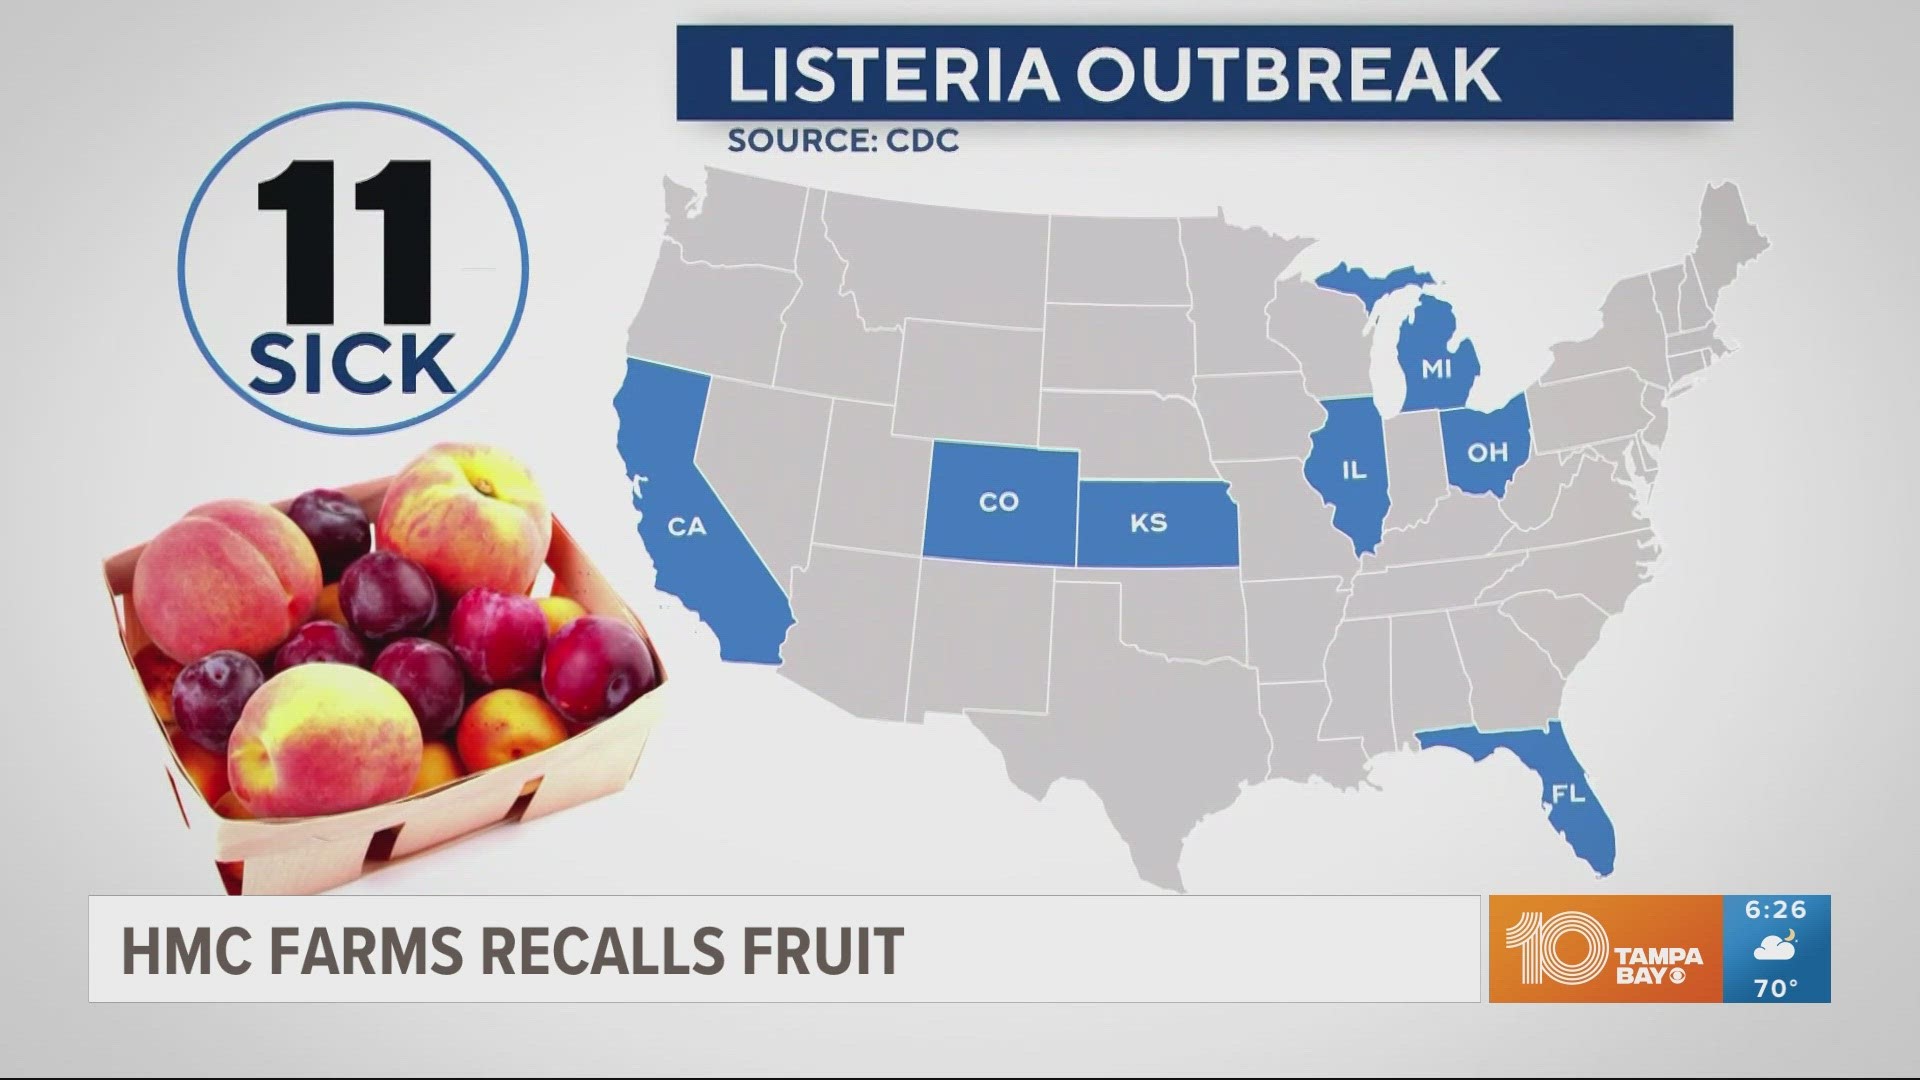 Listeria can cause serious and sometimes fatal infections in children, the elderly, pregnant women and others with weakened immune systems.